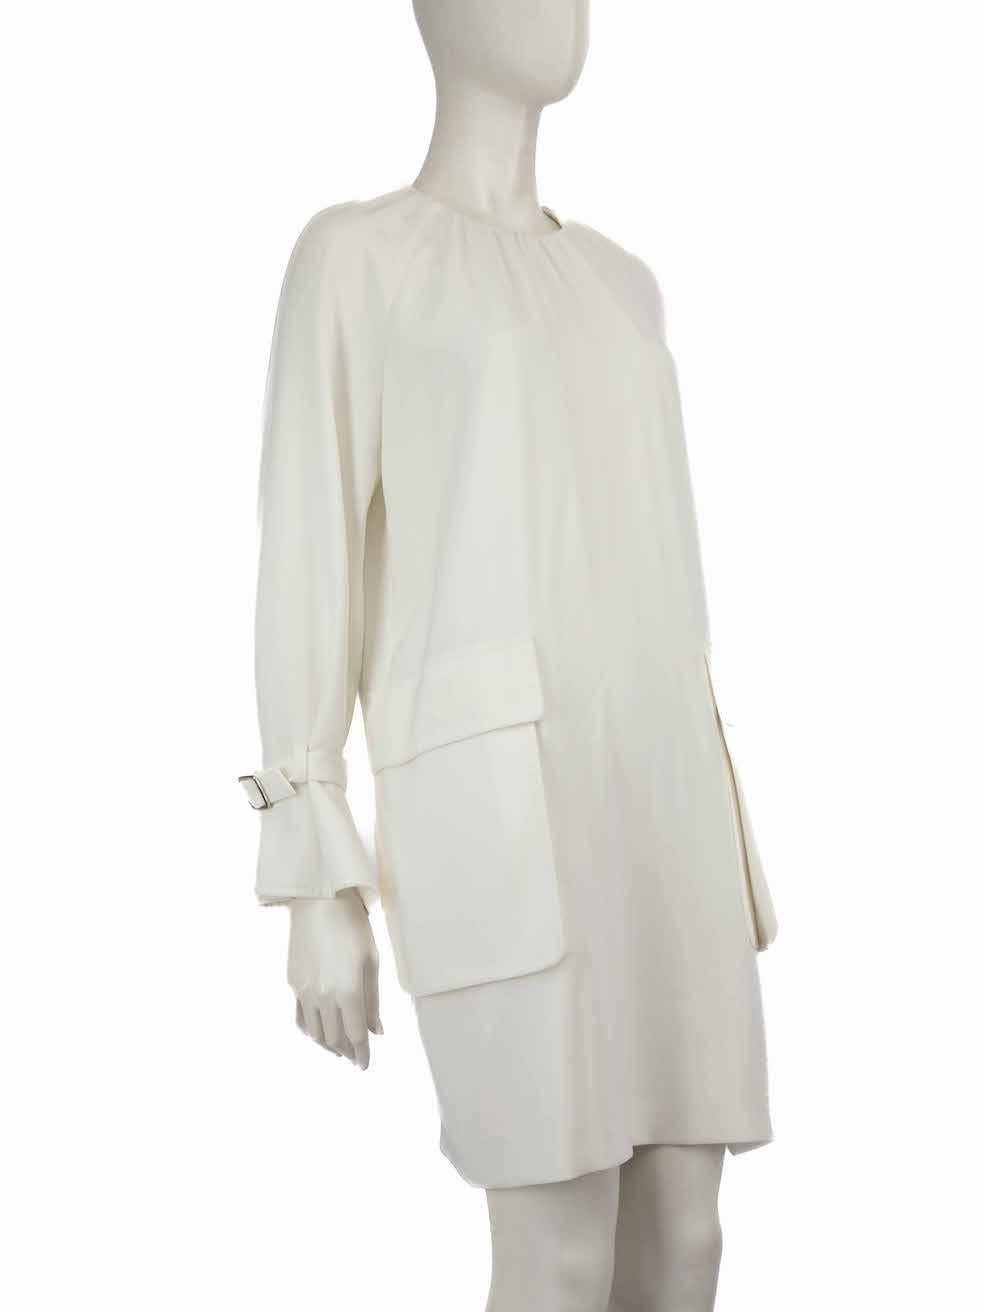 CONDITION is Good. Minor wear to the dress is evident. Light discolouration around the neckline, front centre, left pocket, right cuff, front hemline, top rear, around rear hemline. Loose thread to the interior front hemline on this used Max Mara